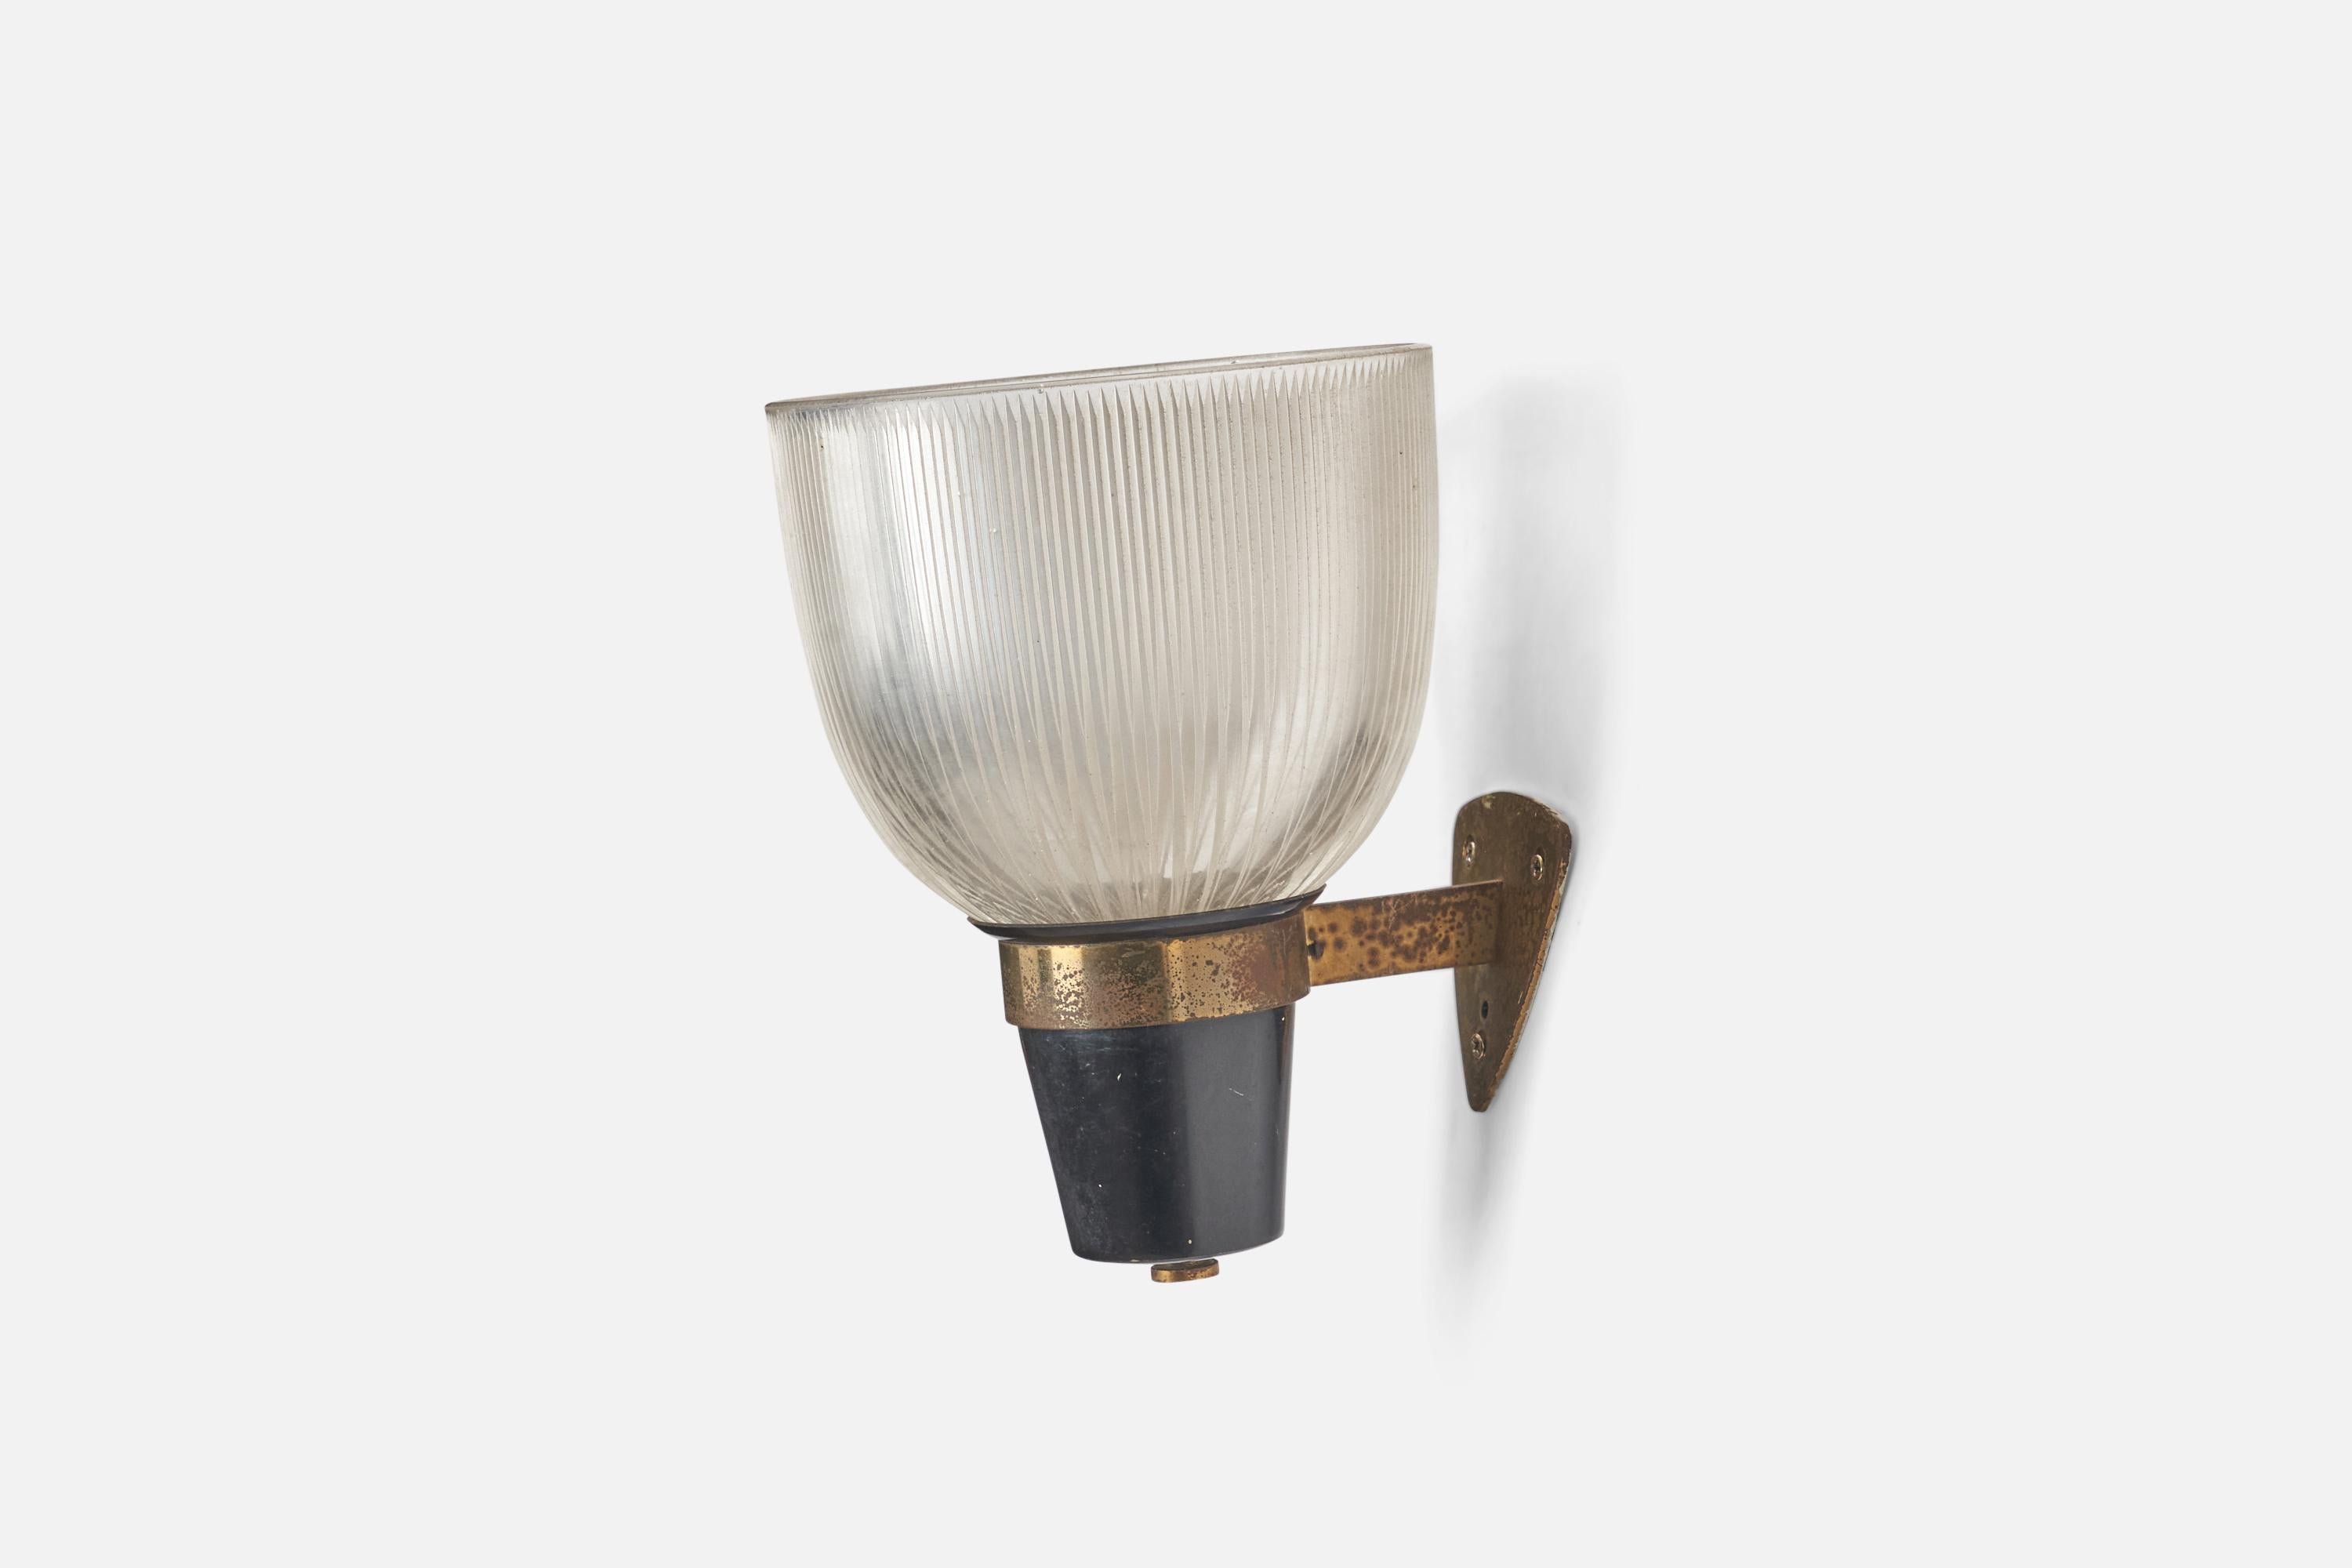 A brass, metal and glass wall light designed by Ignazio Gardella and produced by Azucena, Italy, 1960s.

Dimensions of back plate (inches) : 3.1 x 3.3 x 0.1 (Height x Width x Depth)

Socket takes standard E-26 medium base bulb.

There is no